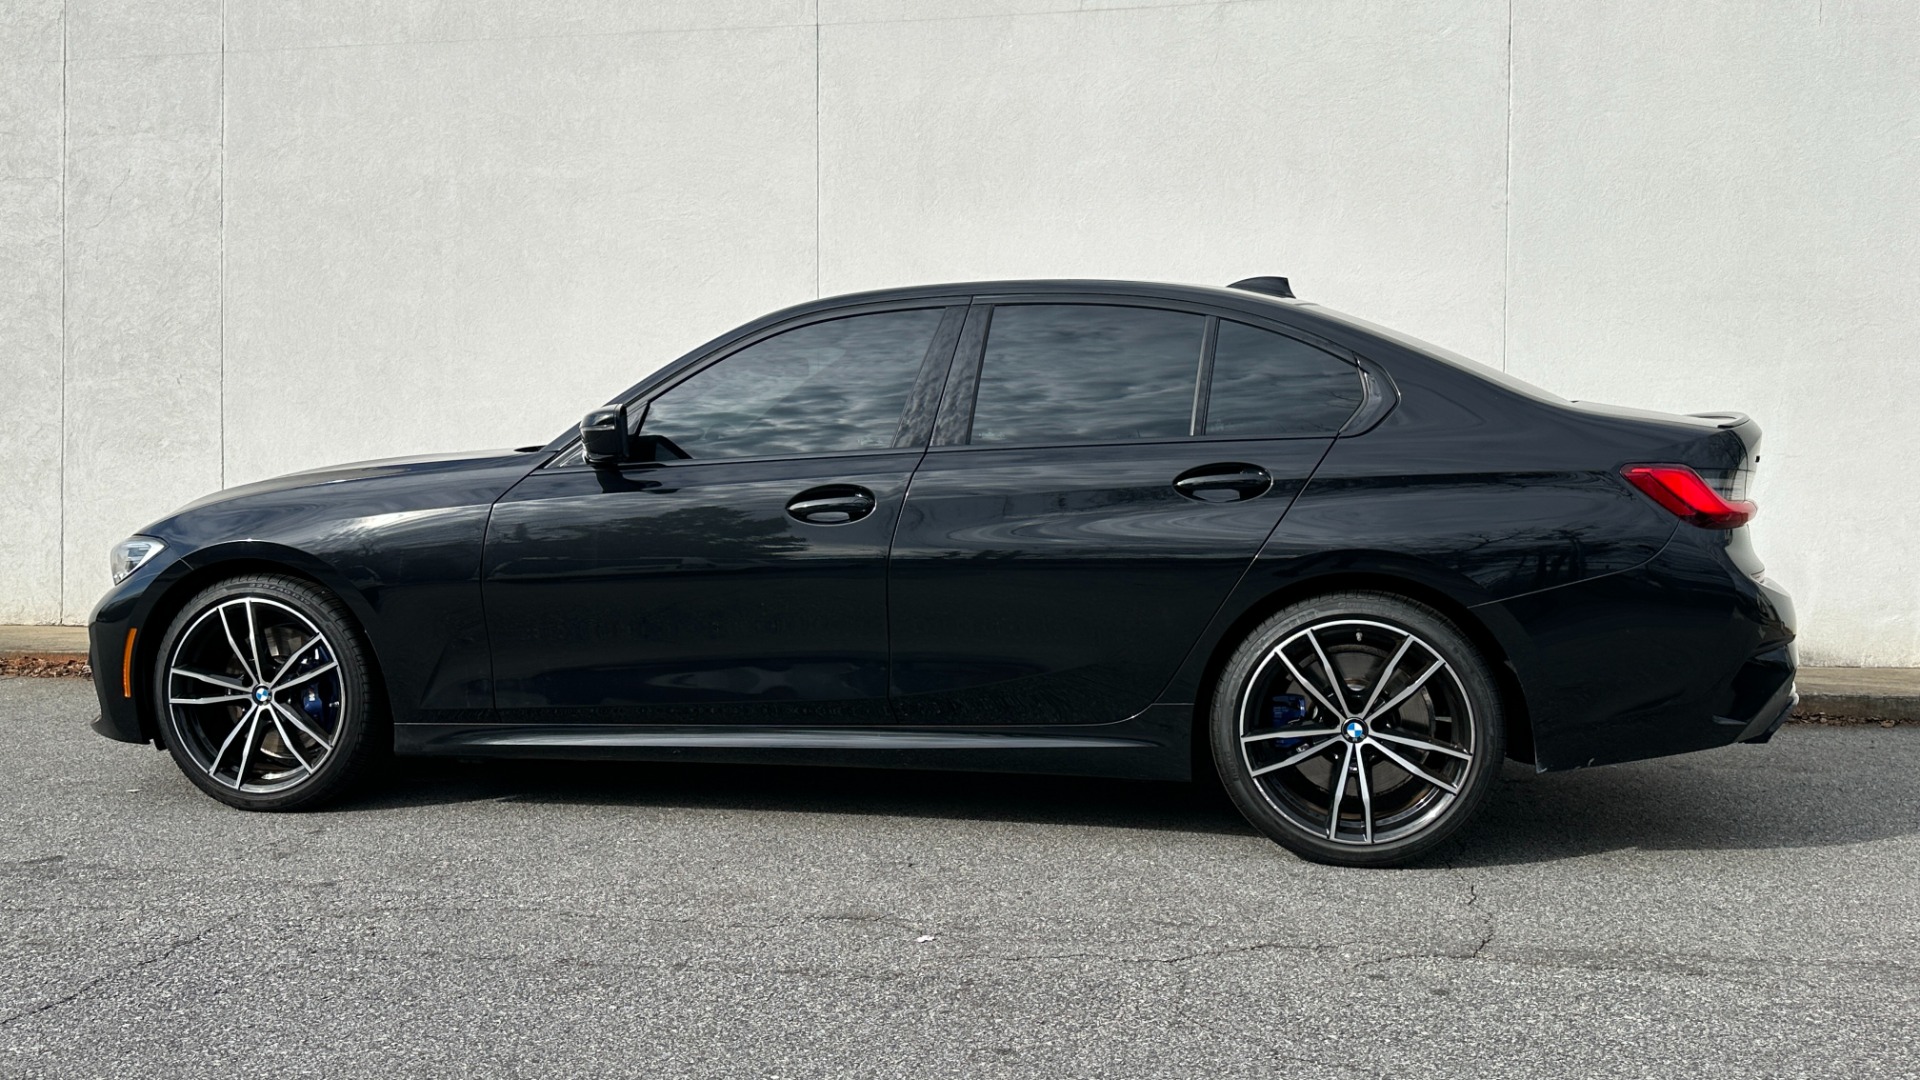 Used 2021 BMW 3 Series M340i xDrive / SHADOW-LINE / DRIVER ASSIST / HARMAN KARDON / PREMIUM PACKAG for sale $46,995 at Formula Imports in Charlotte NC 28227 3